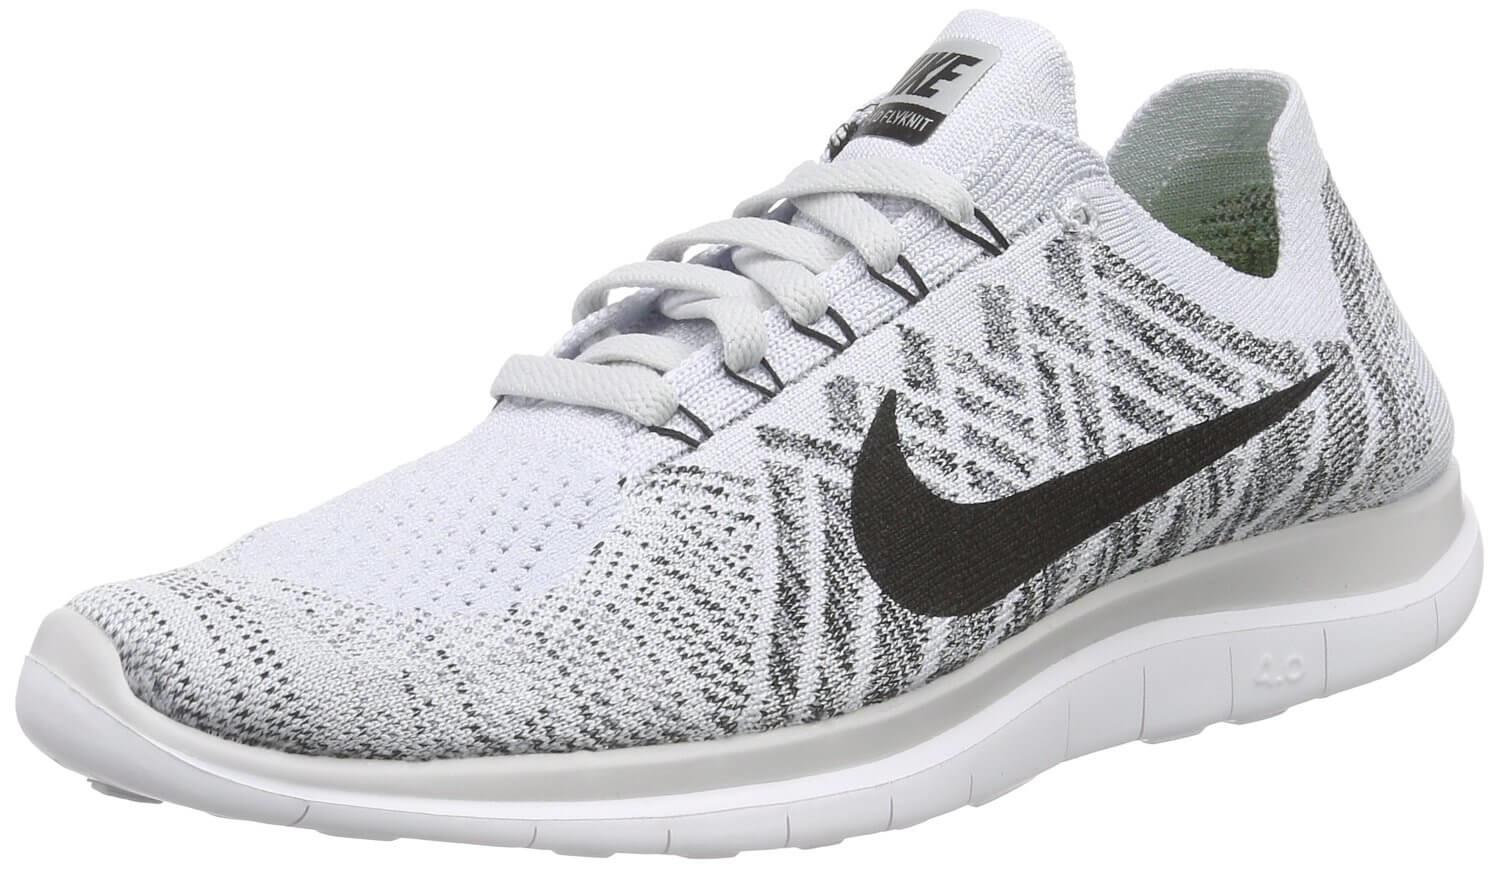 atoom Tulpen Discreet Nike Free Flyknit 4.0 Reviewed, Tested & Compared in 2022 | RunnerClick